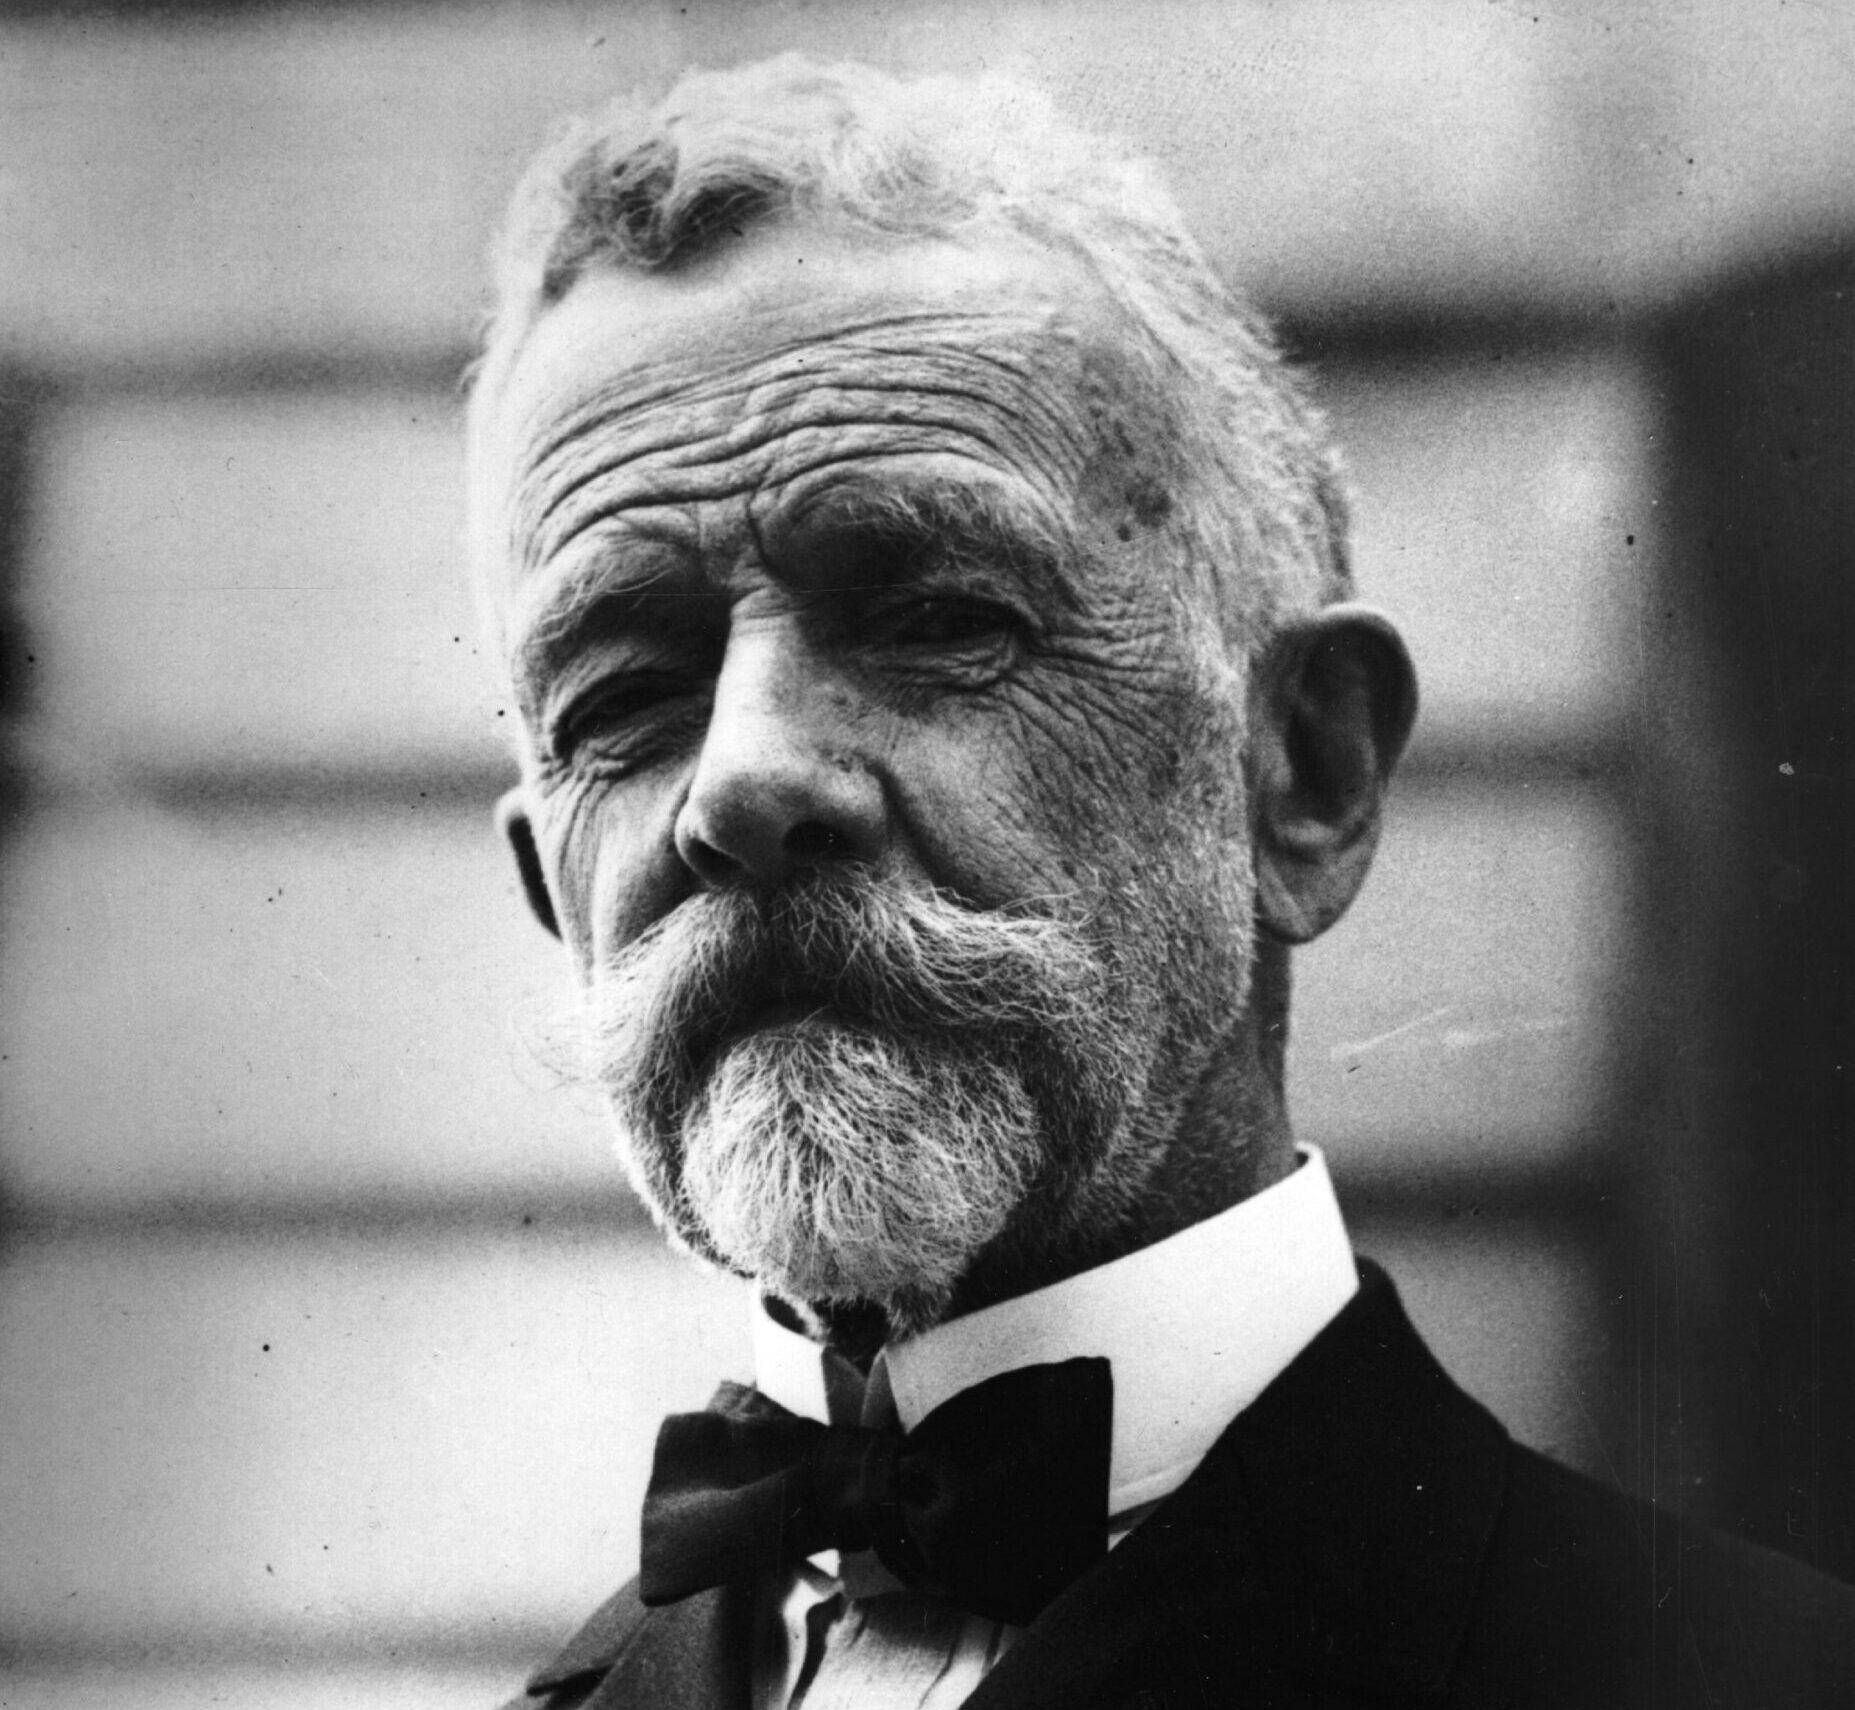 Senator Henry Cabot Lodge in black and white (Keystone/Hulton Archive via Getty Images)